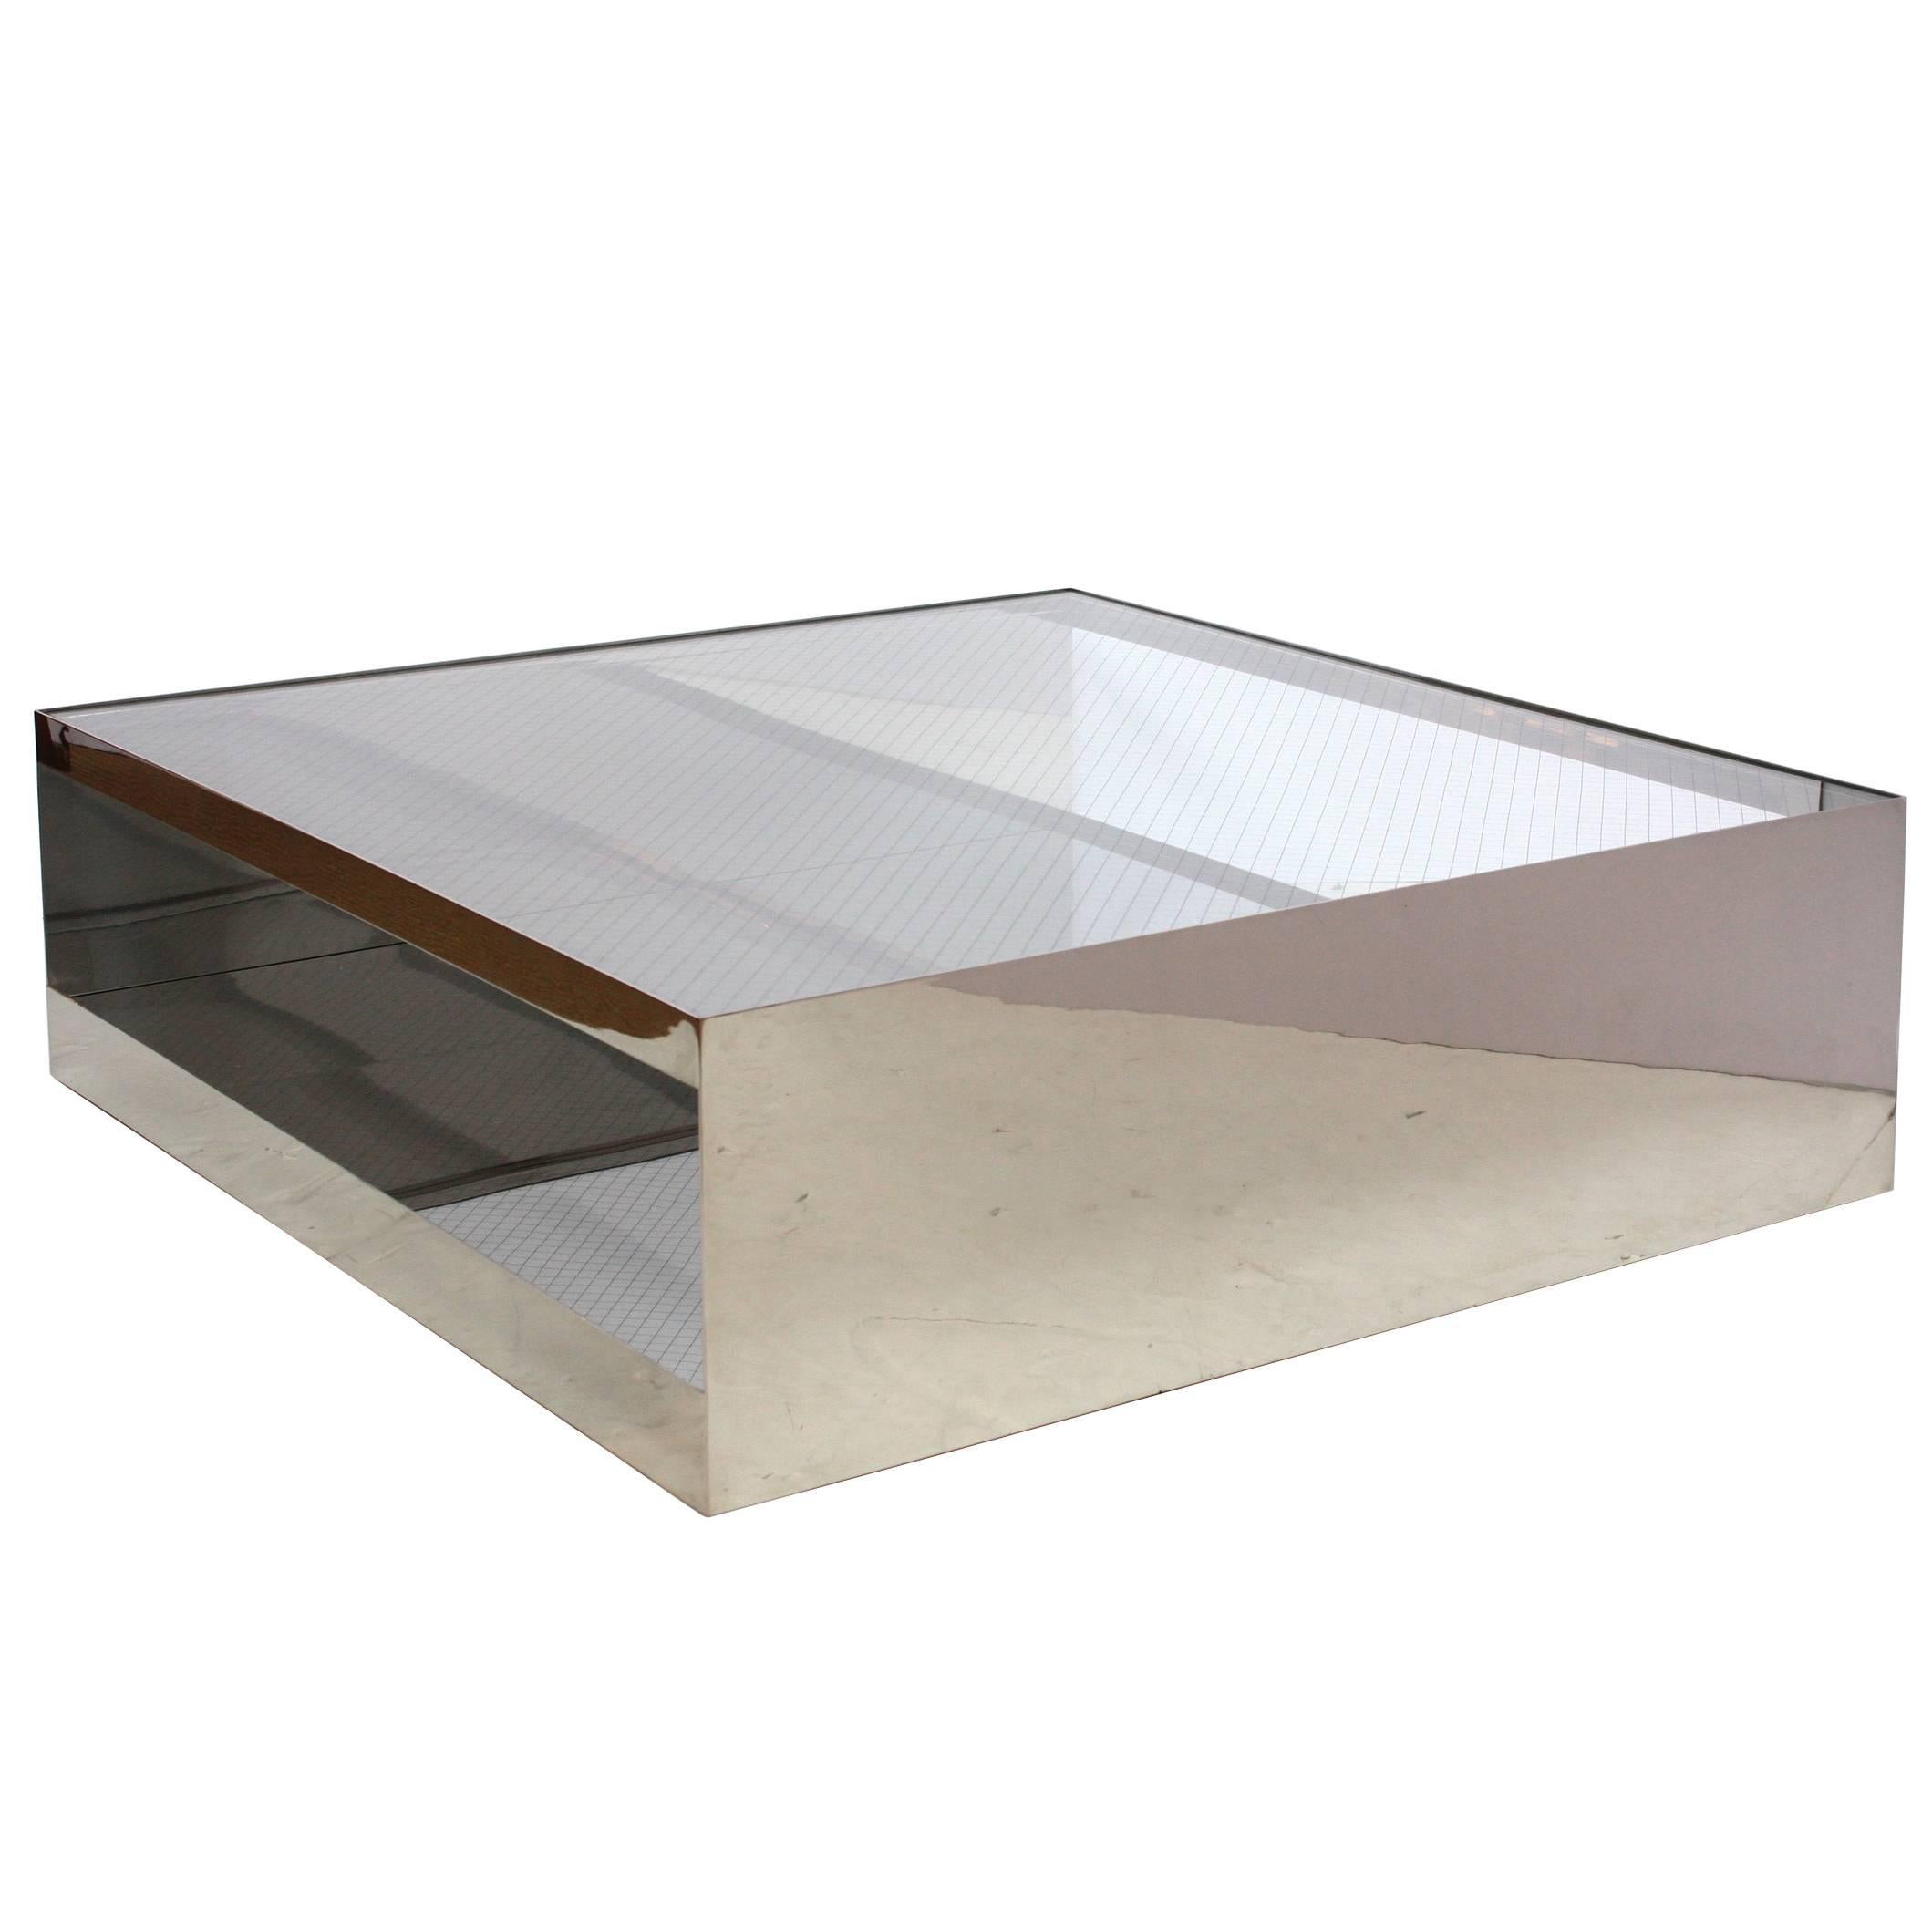 Joseph D'Urso's Industrial Coffee Table of Steel and Glass, Knoll International